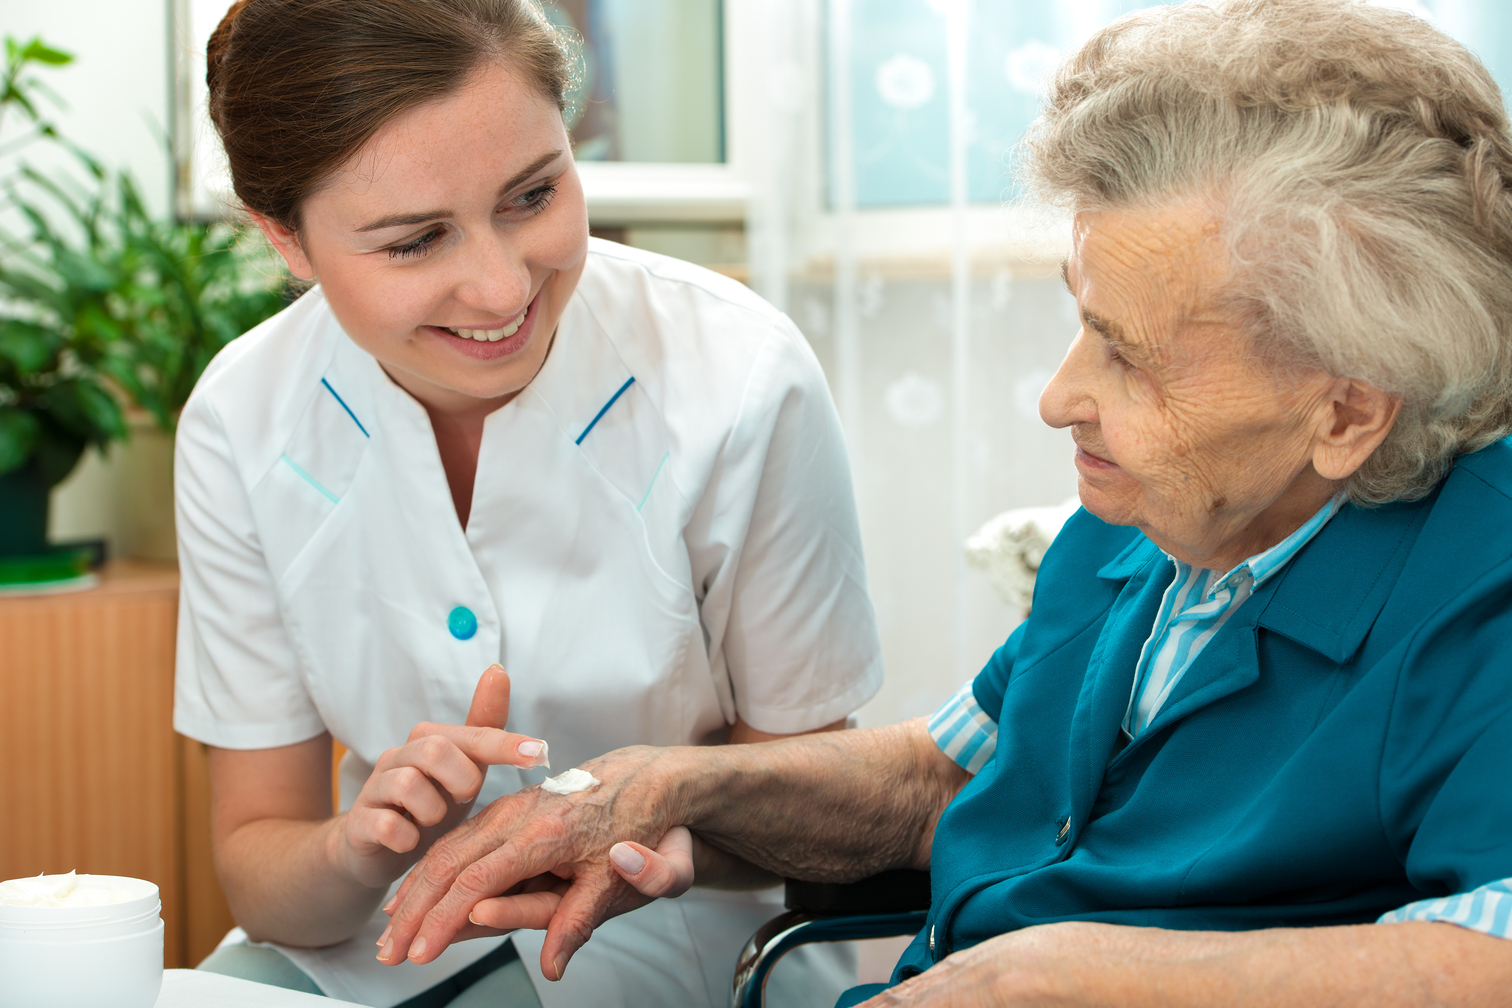 Personal Care Attendants assist with non-medical needs as part of home care service